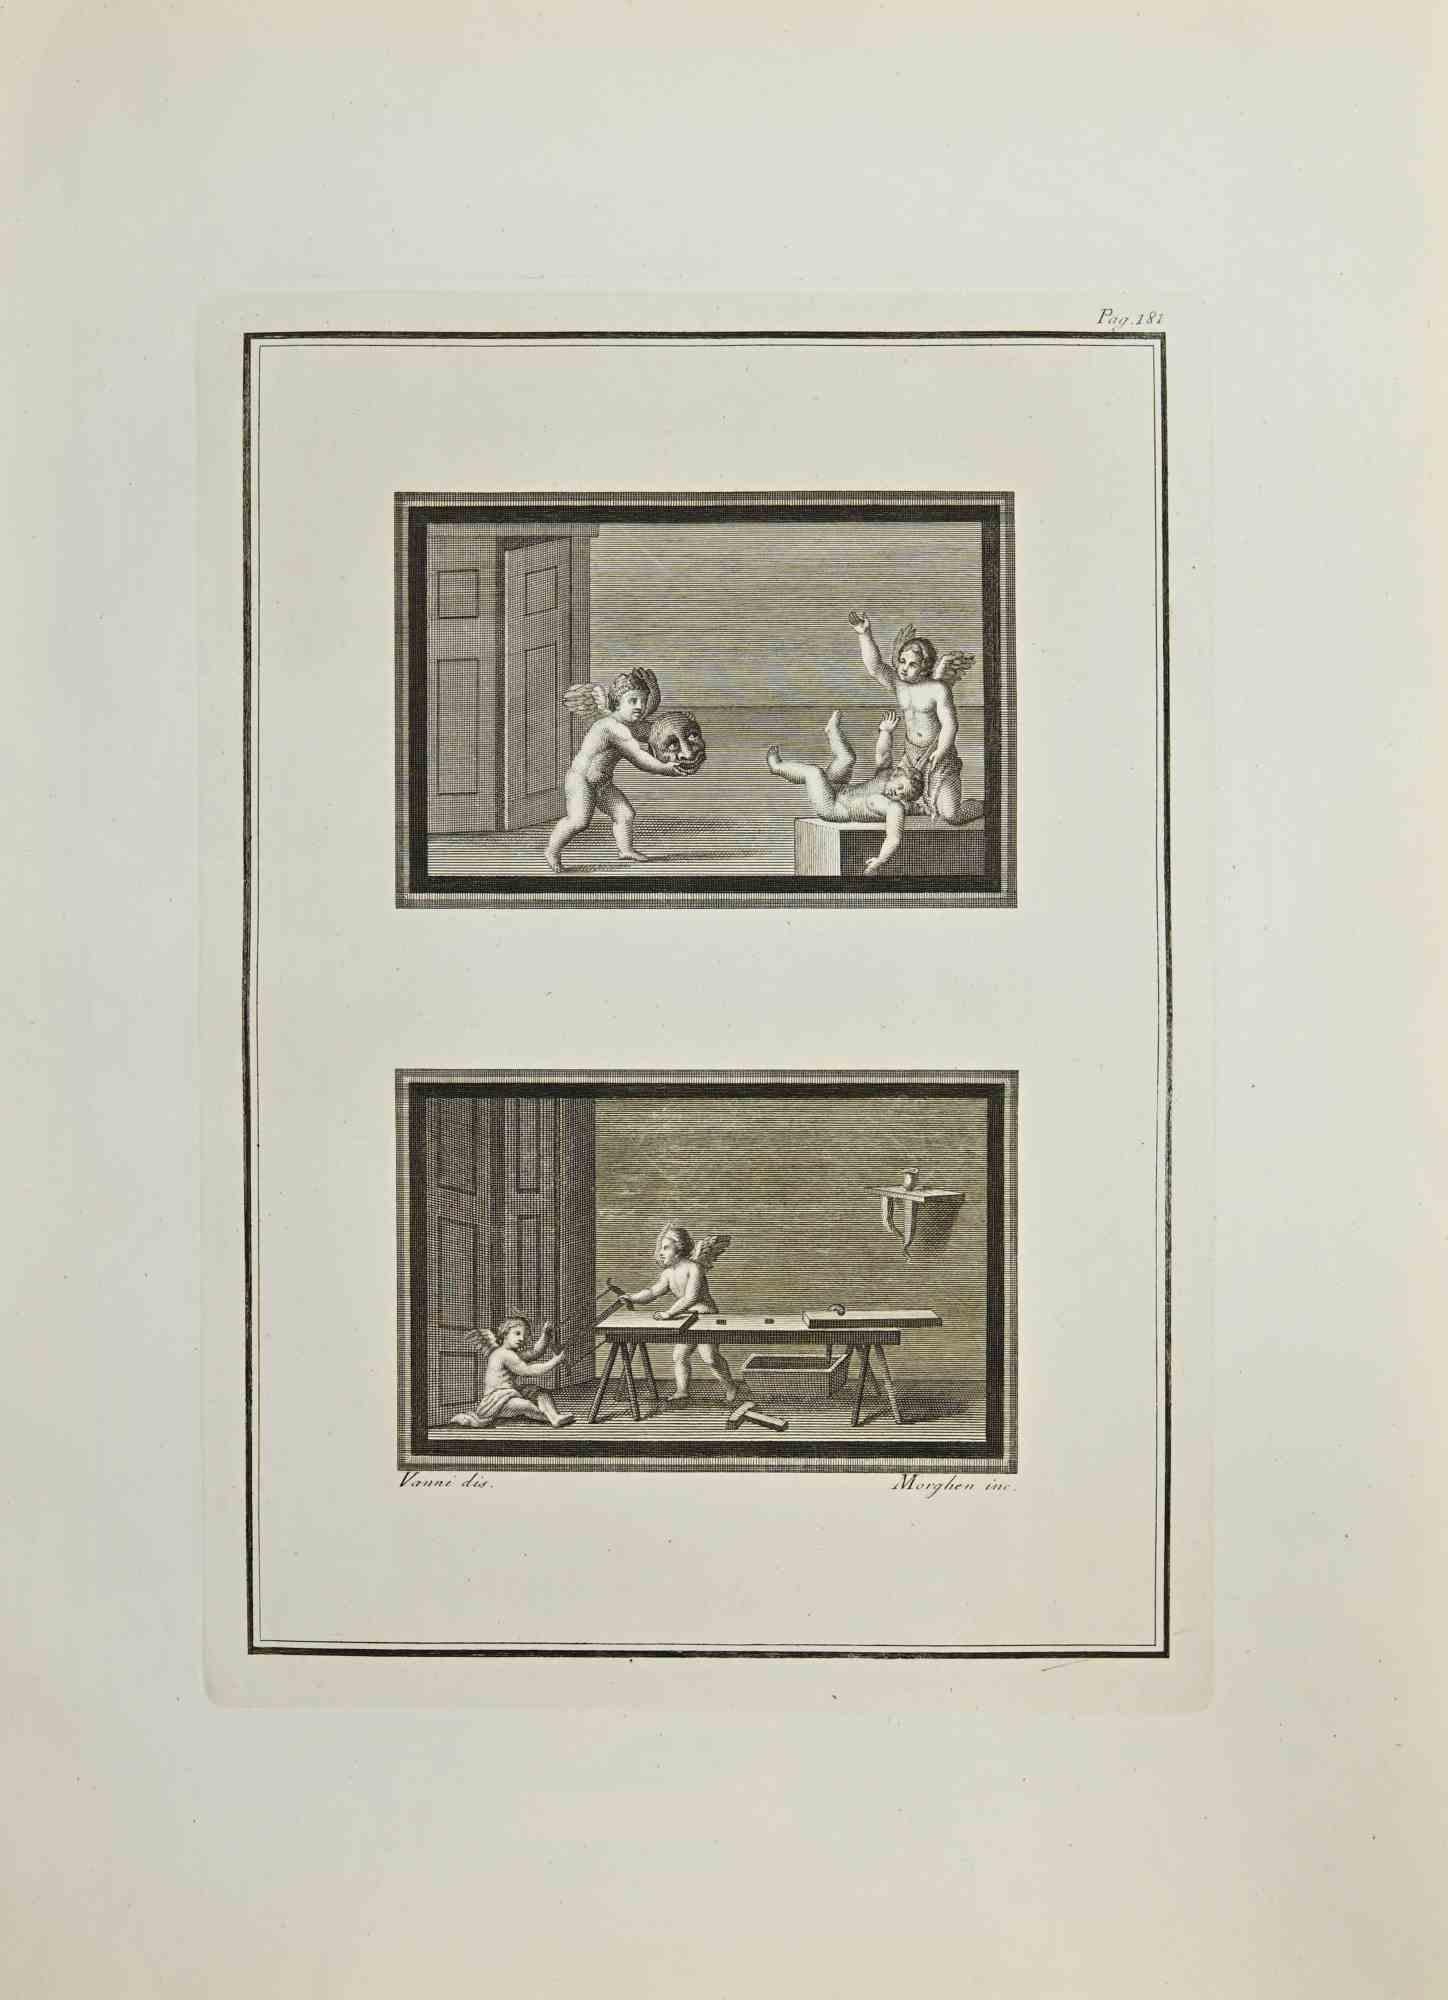 Cupids and Genii Wall Fresco from "Antiquities of Herculaneum" is an etching on paper realized by Filippo Morghen in the 18th Century.

Signed on the plate.

Good conditions with some folding.

The etching belongs to the print suite “Antiquities of